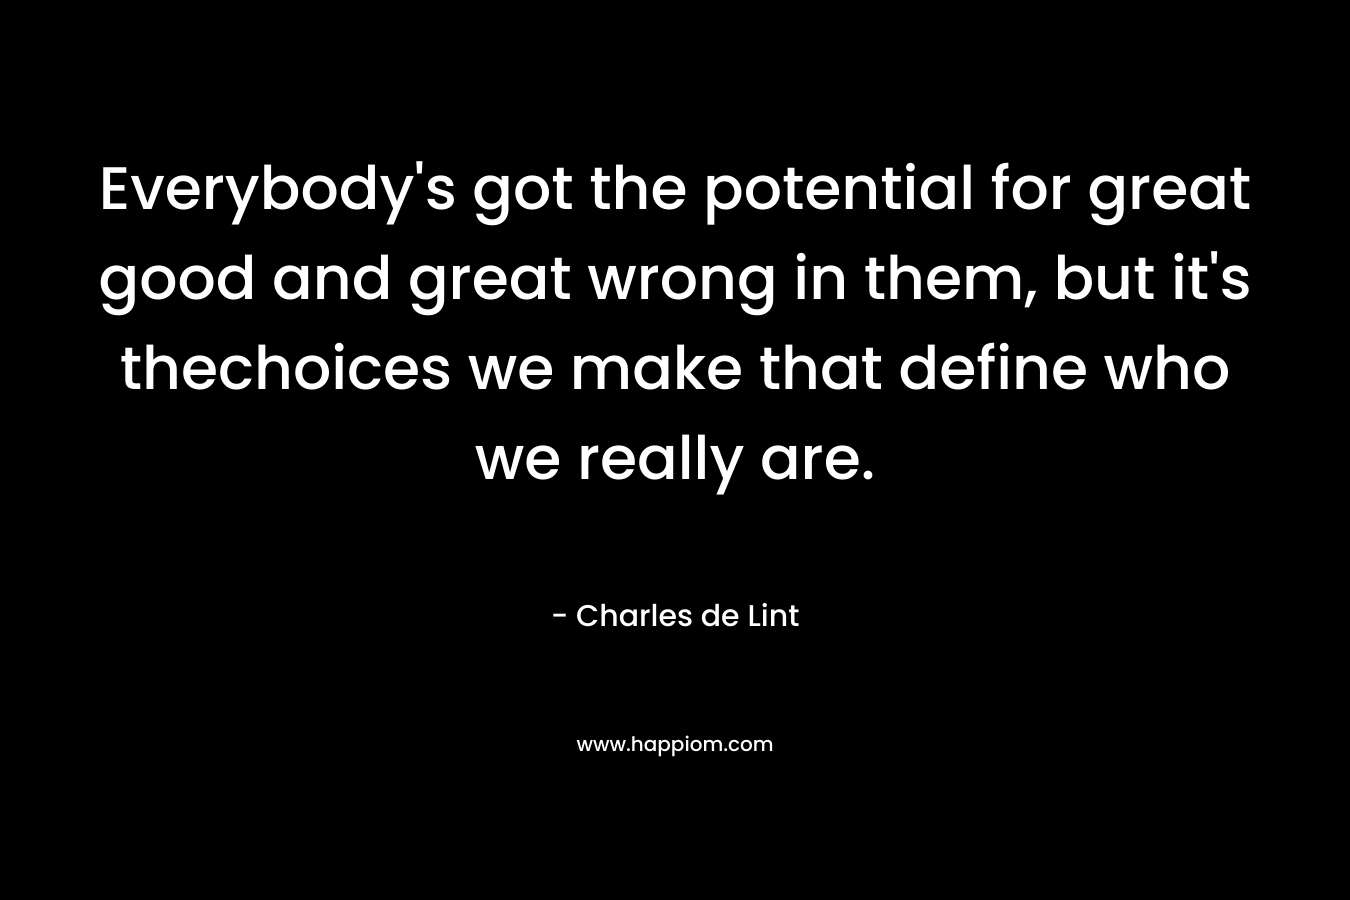 Everybody’s got the potential for great good and great wrong in them, but it’s thechoices we make that define who we really are. – Charles de Lint